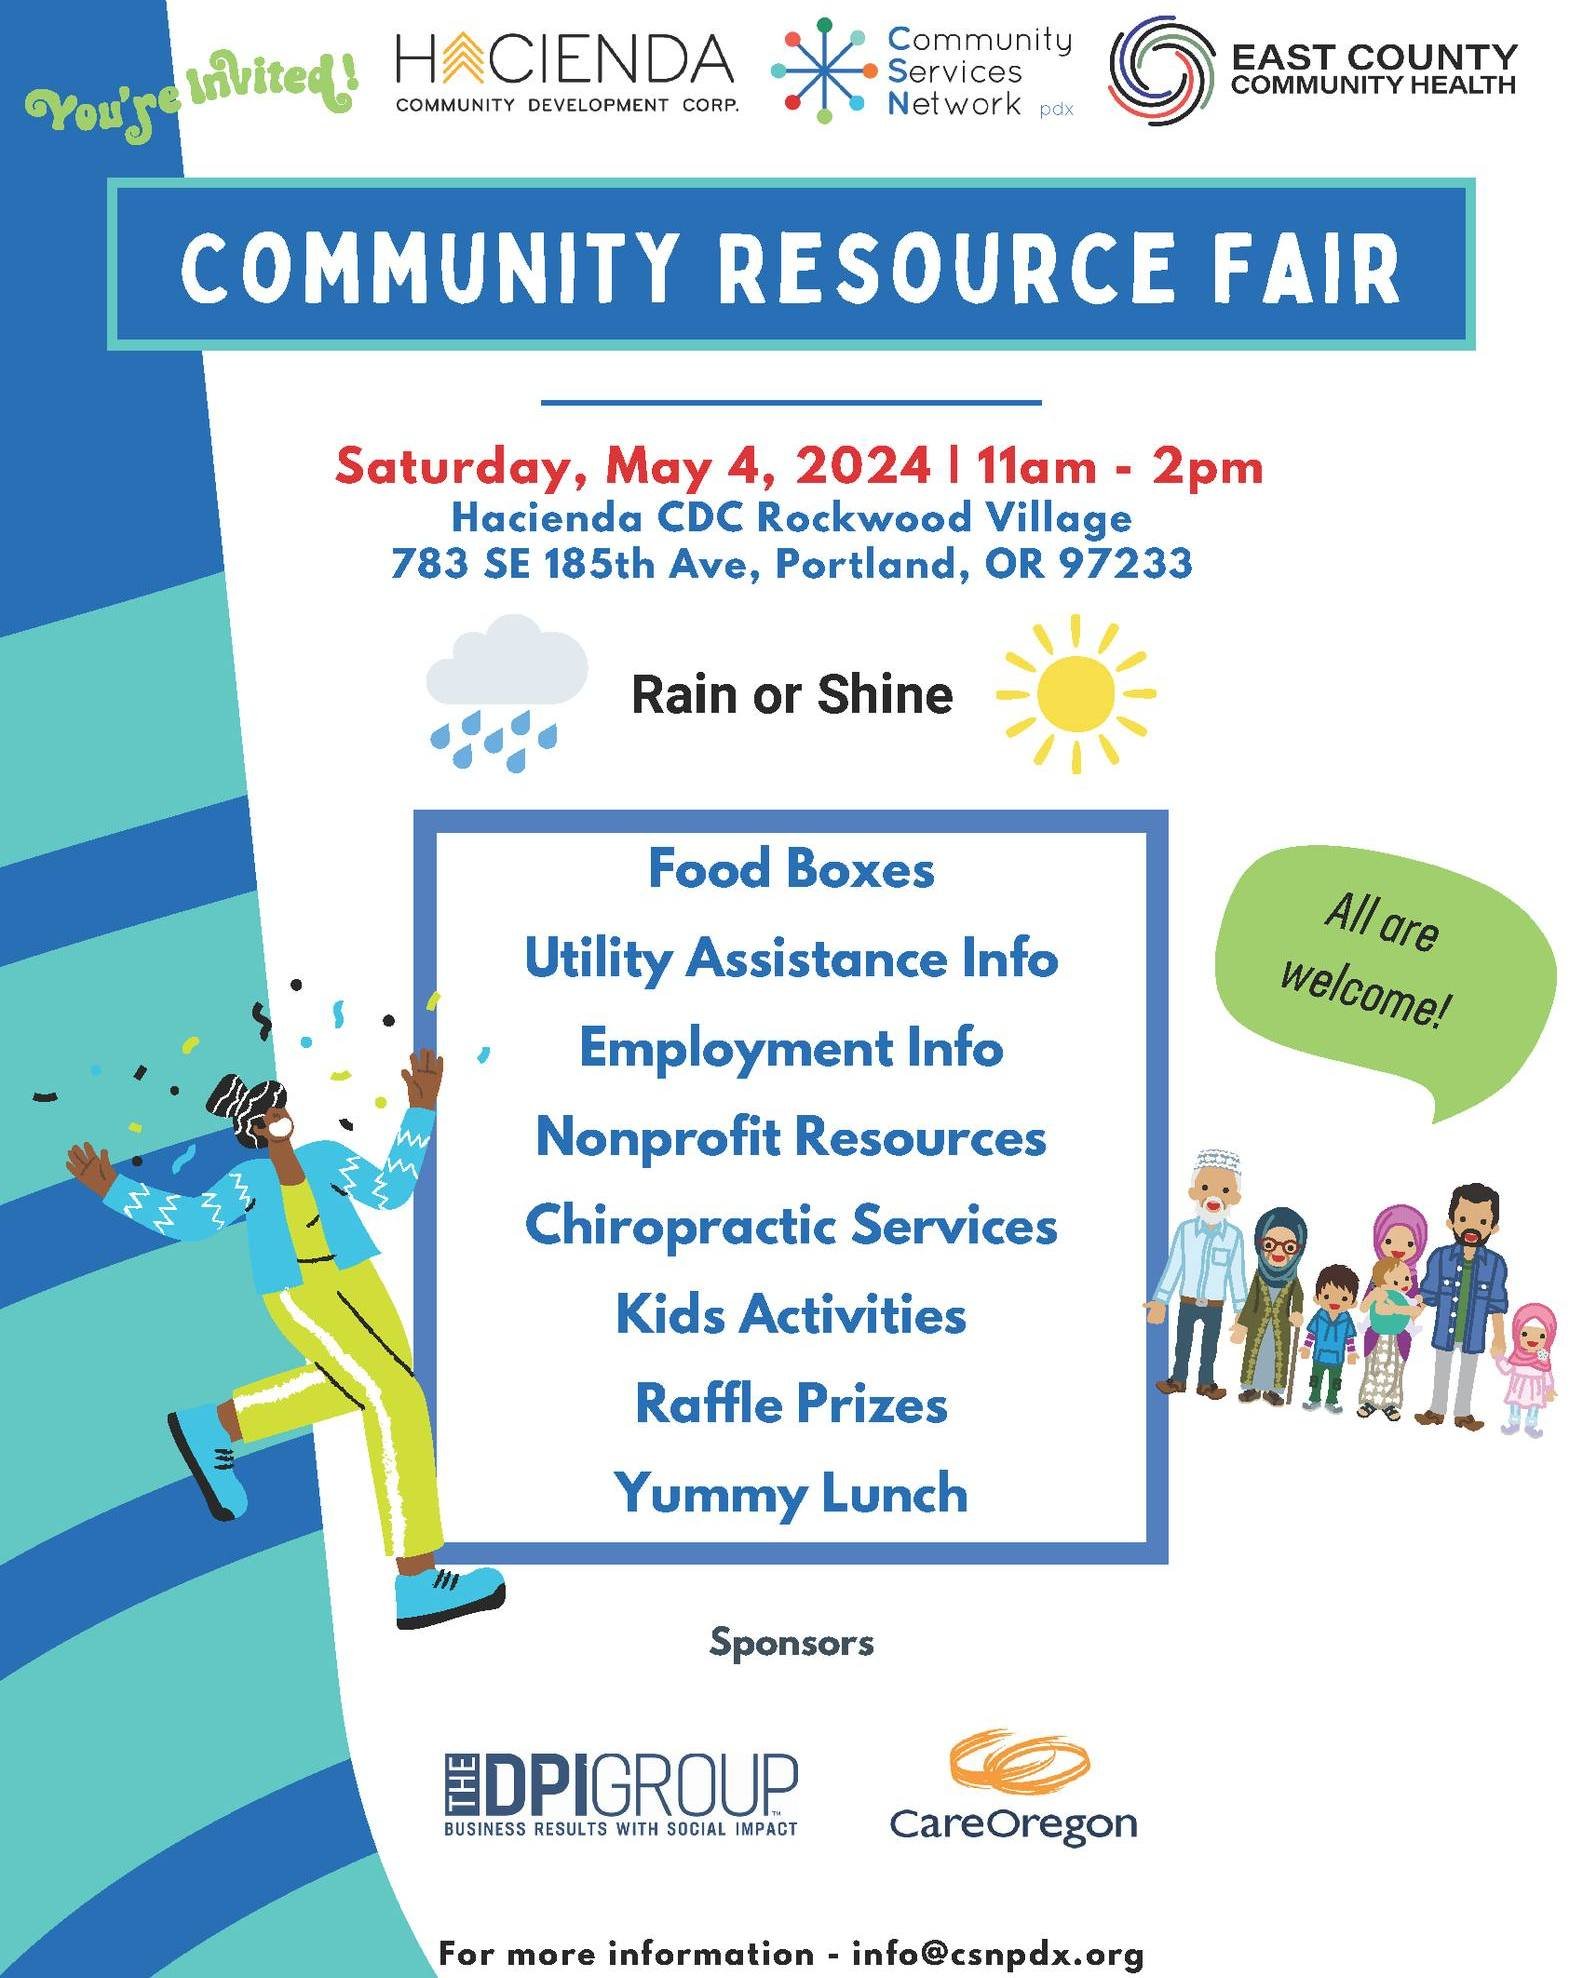 Join us this Saturday, May 4, at Hacienda CDC Rockwood Village for a Community and Youth Resource Fair! From 11am to 2pm, rain or shine, we're offering a wide range of resources and fun activities perfect for the whole family!

Here&rsquo;s what you 